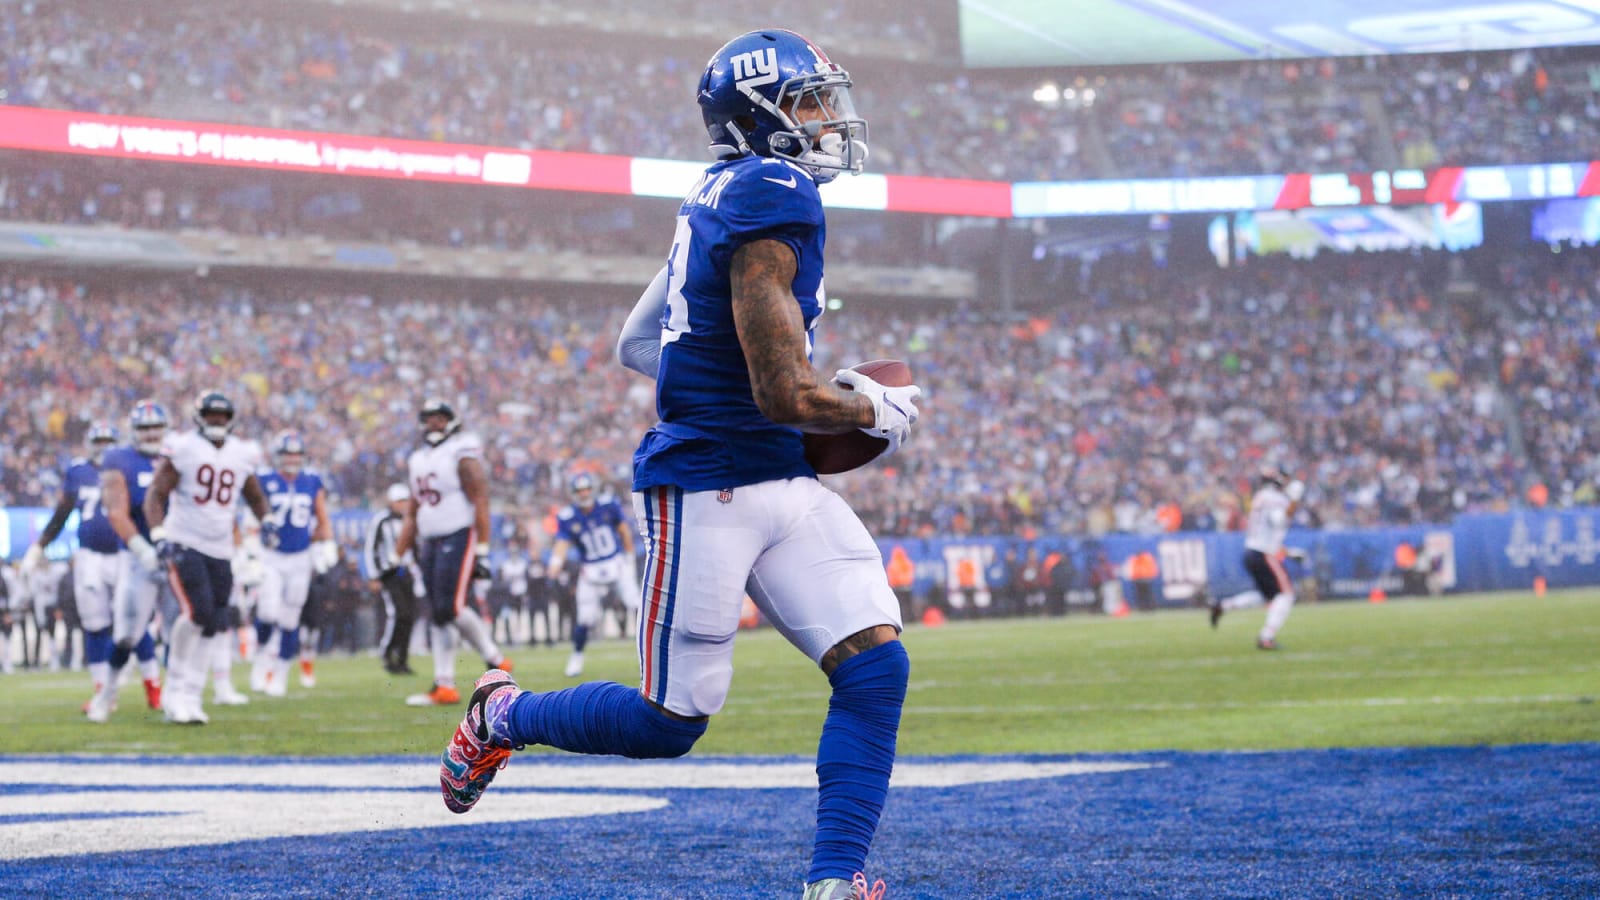 New York Giants remain possible suitor for WR Odell Beckham Jr